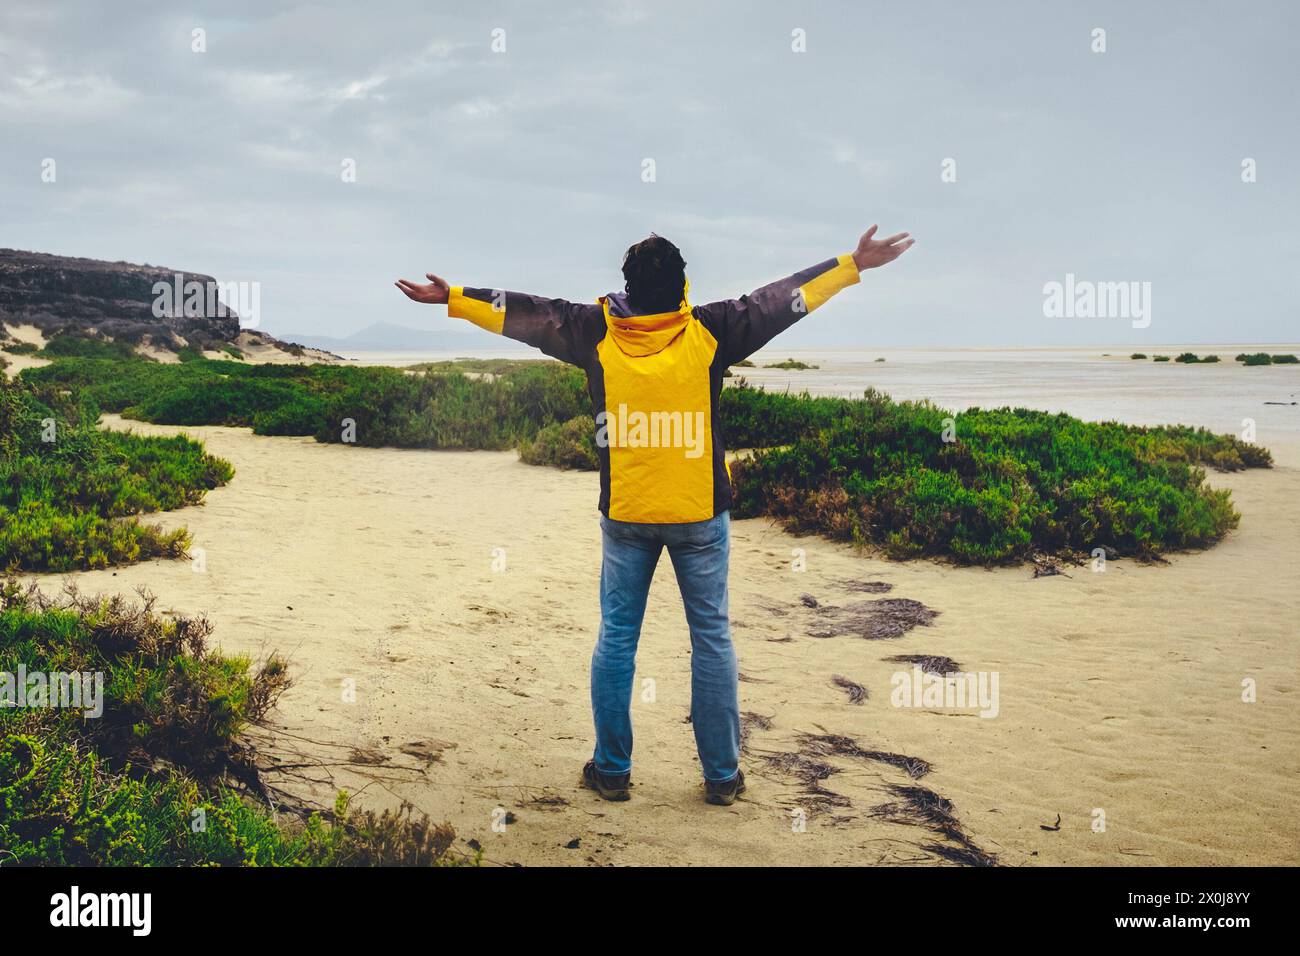 Back view of man standing and outstretching arms agains a wonderful wild landscape at the beach. Explore and adventure lifestyle people. Travel male enjoying nature Stock Photo